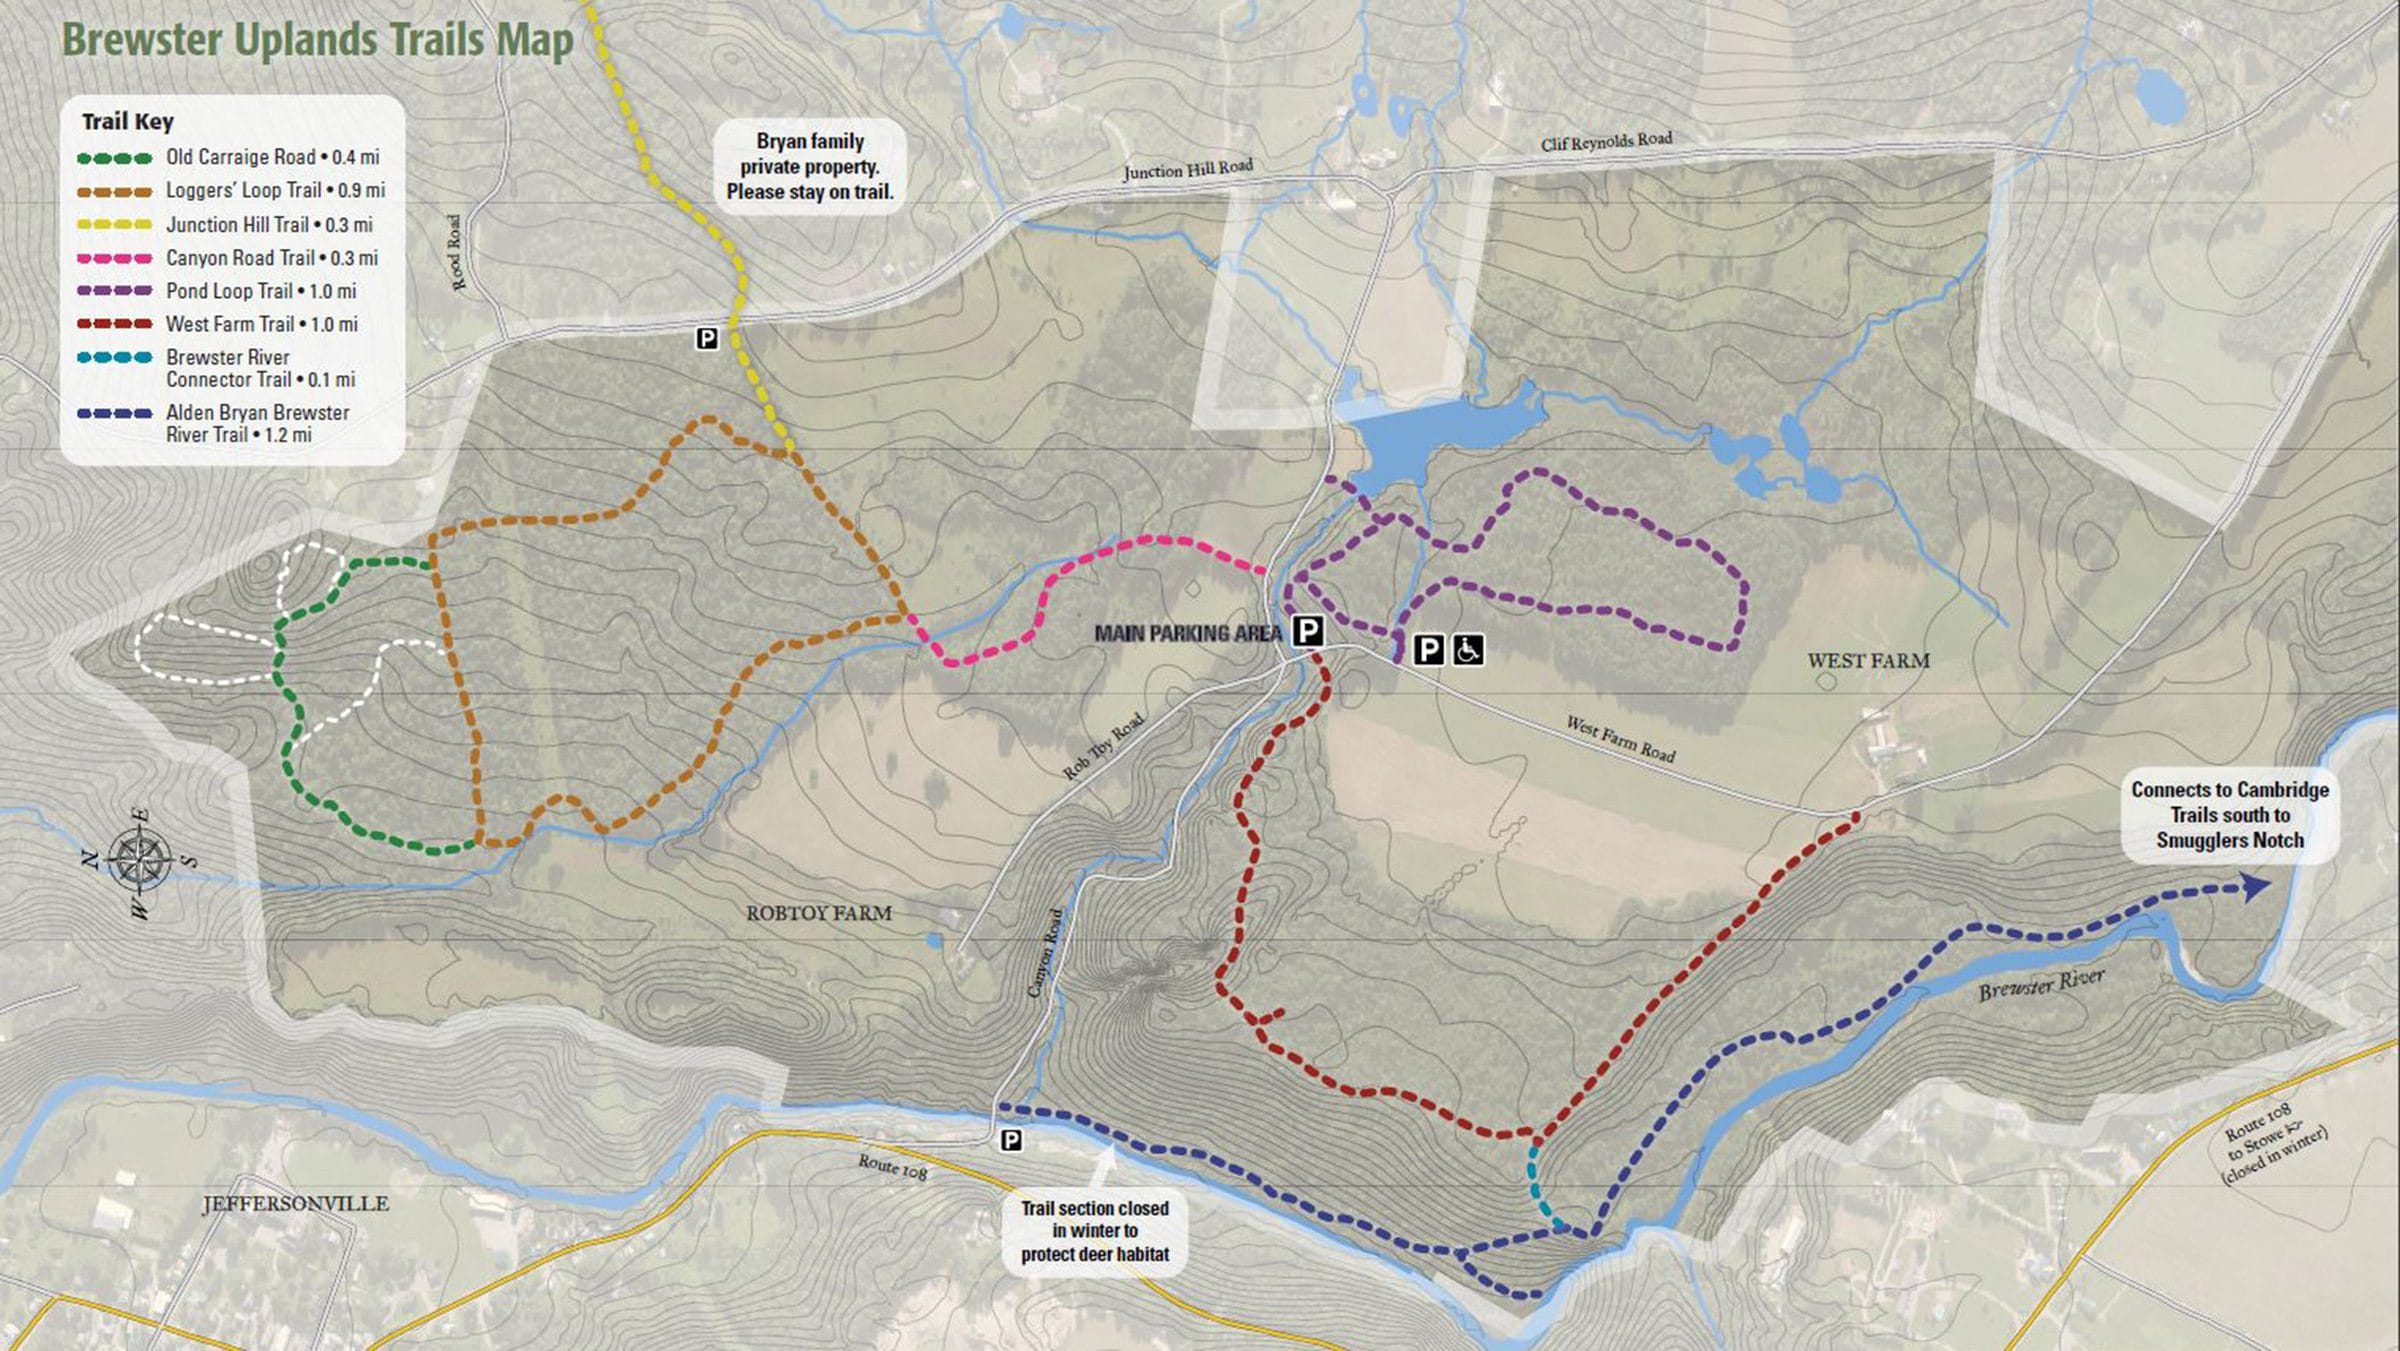 Trail map of Brewster Uplands